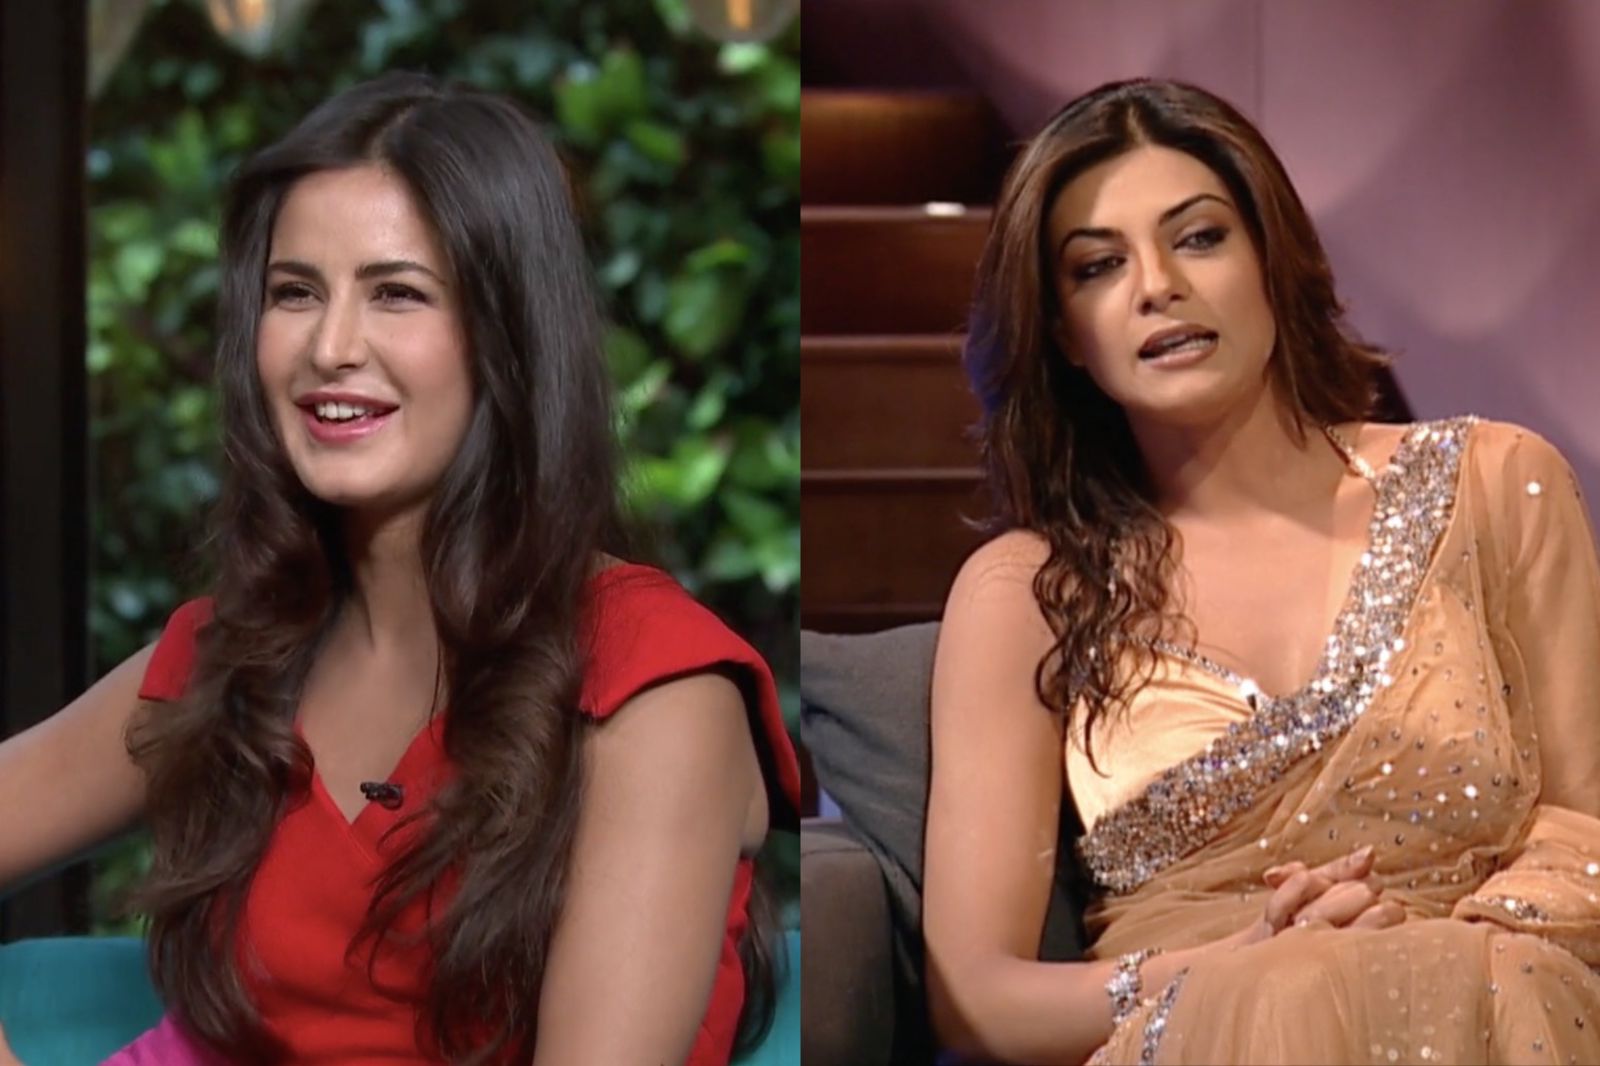 Ahead of Koffee With Karan Season 7 Here Are 9 Lipstick Moments From The Show We’re Still Dreaming Of